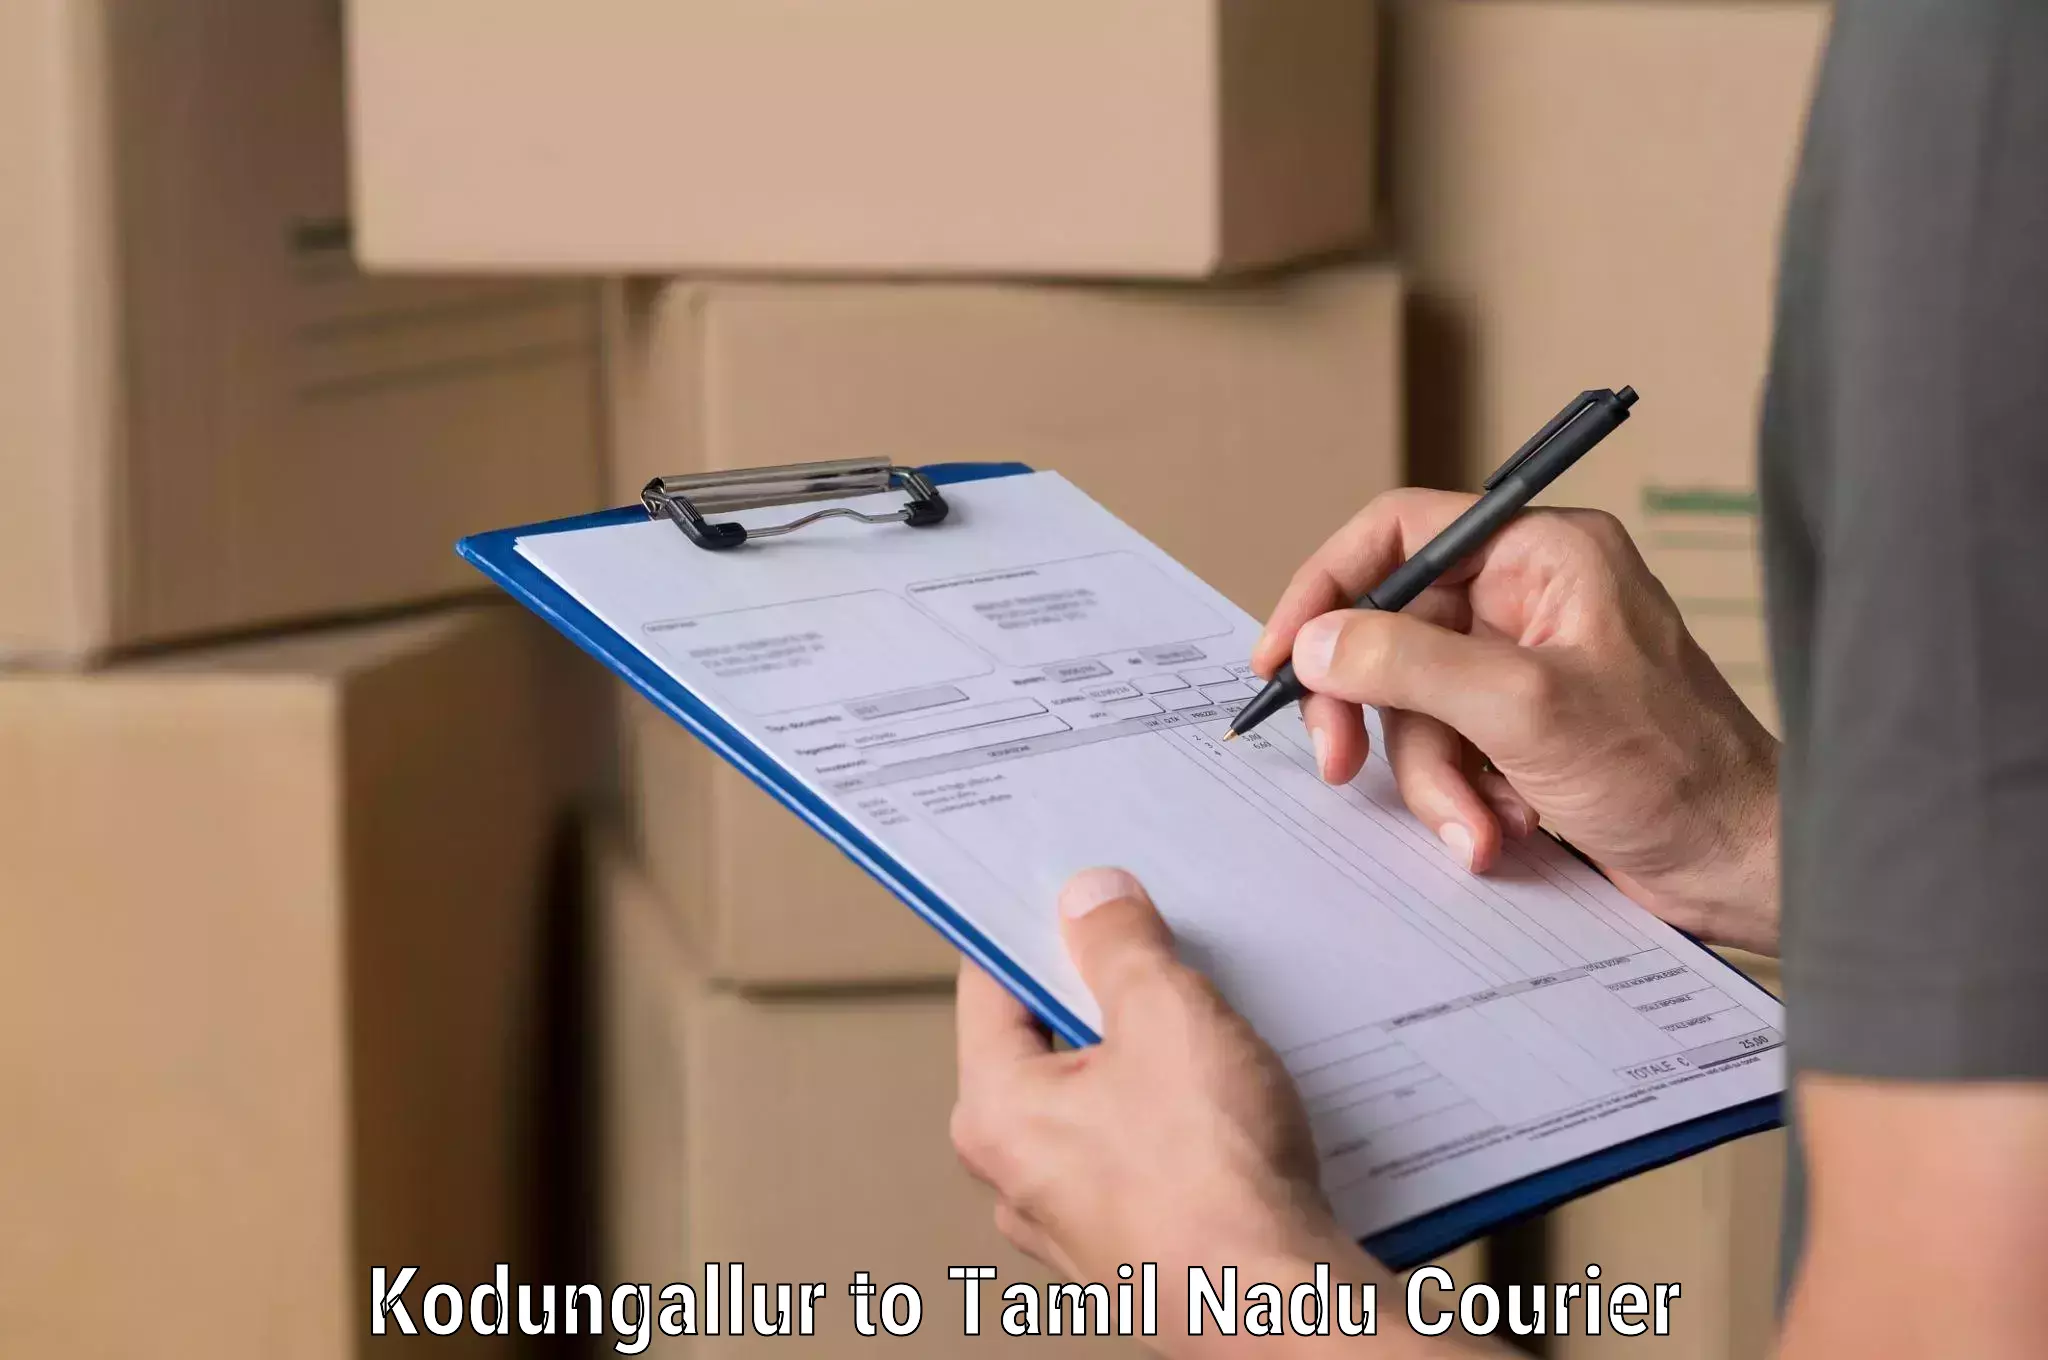 Easy access courier services Kodungallur to Chennai Port